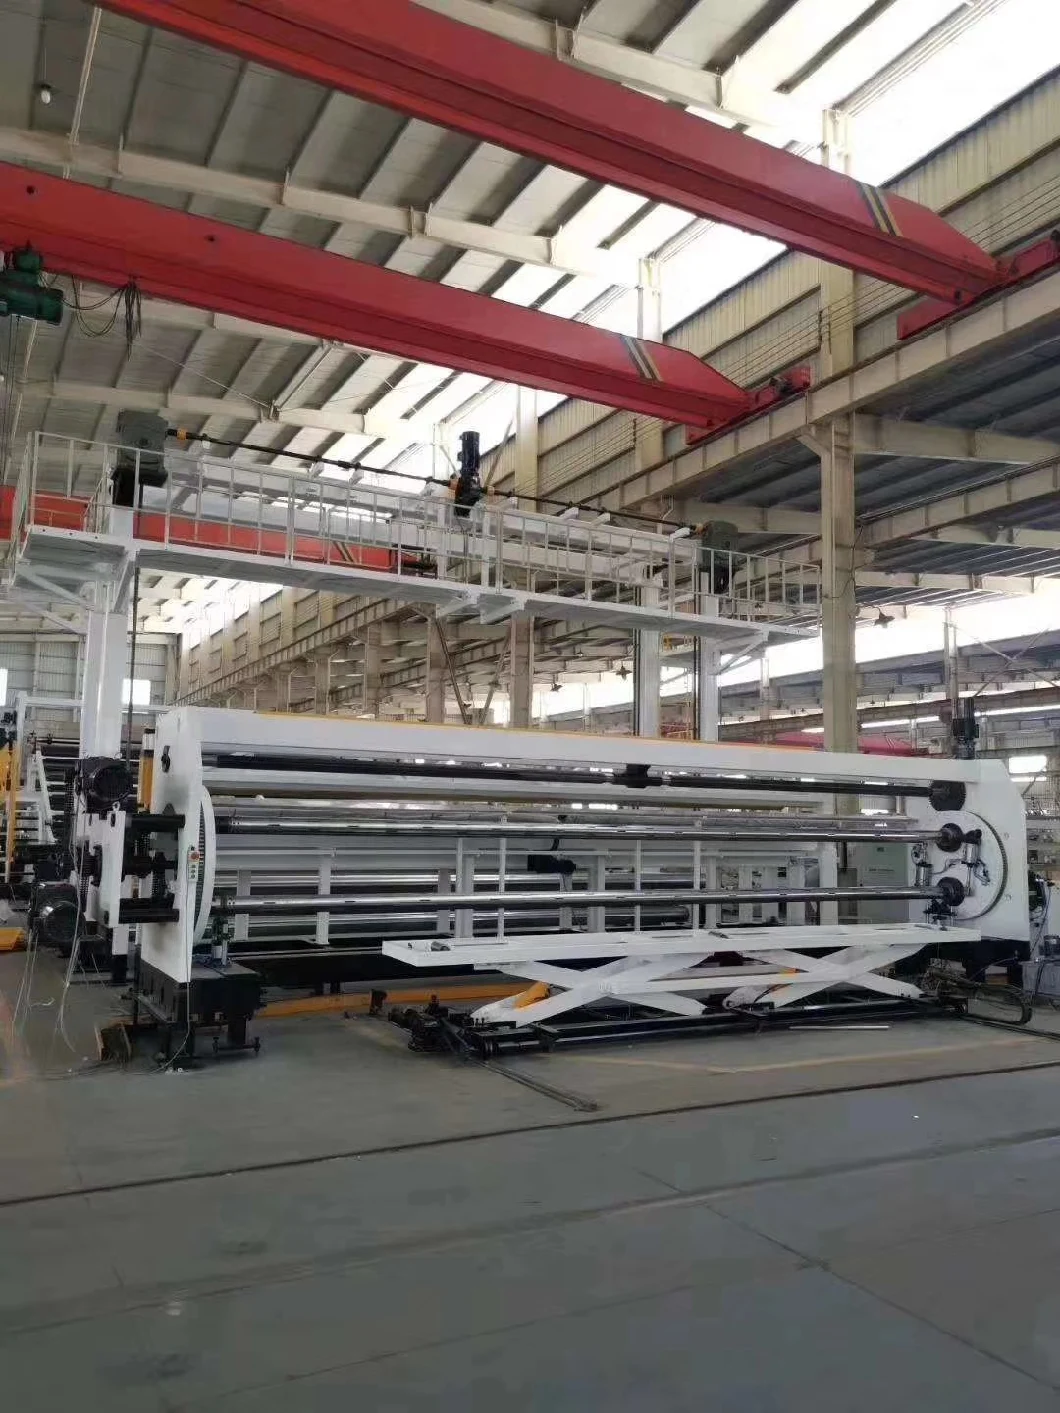 Jwell HDPE 8000mm Geomembrane/Waterproof Membrance Roll  Sheet Extrusion Machine